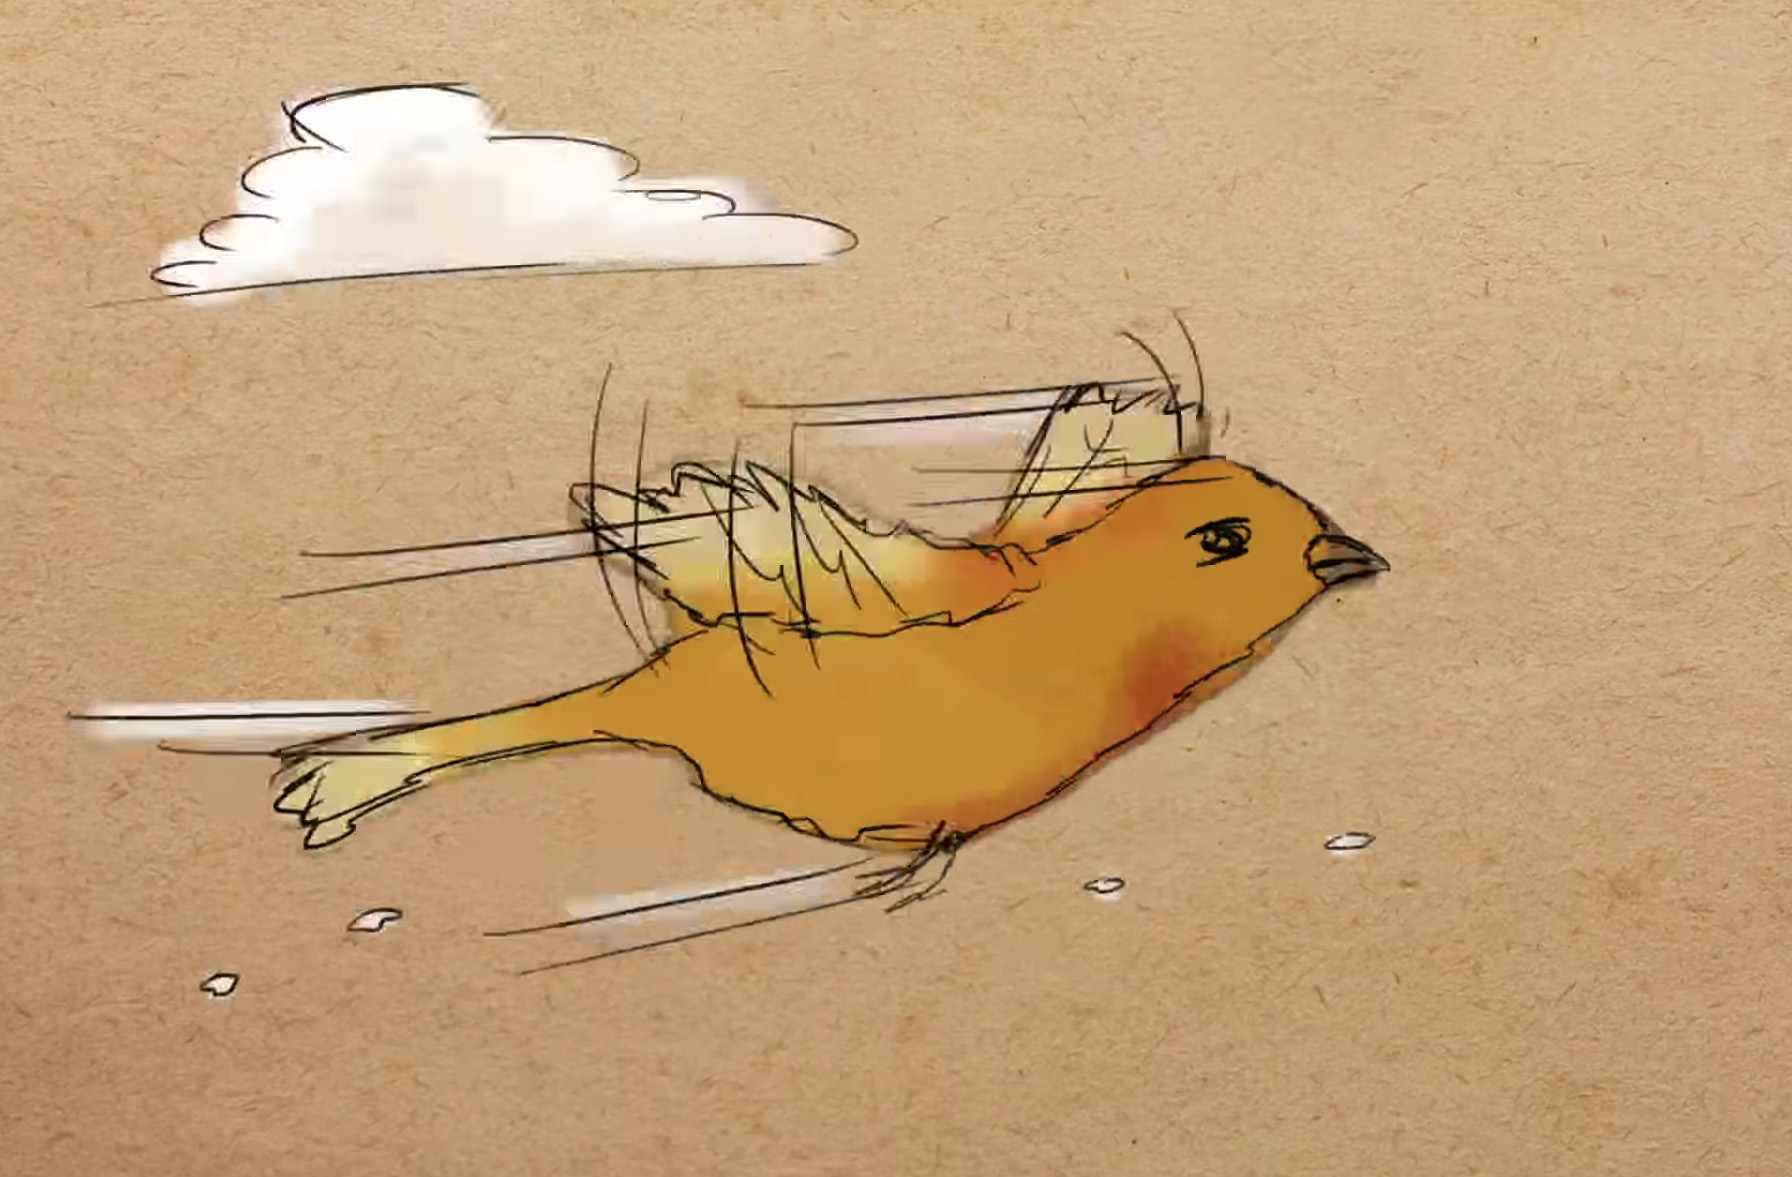 Illustration of an extinct kakawahie. It's a golden yellow bird with reddish patches on its body.